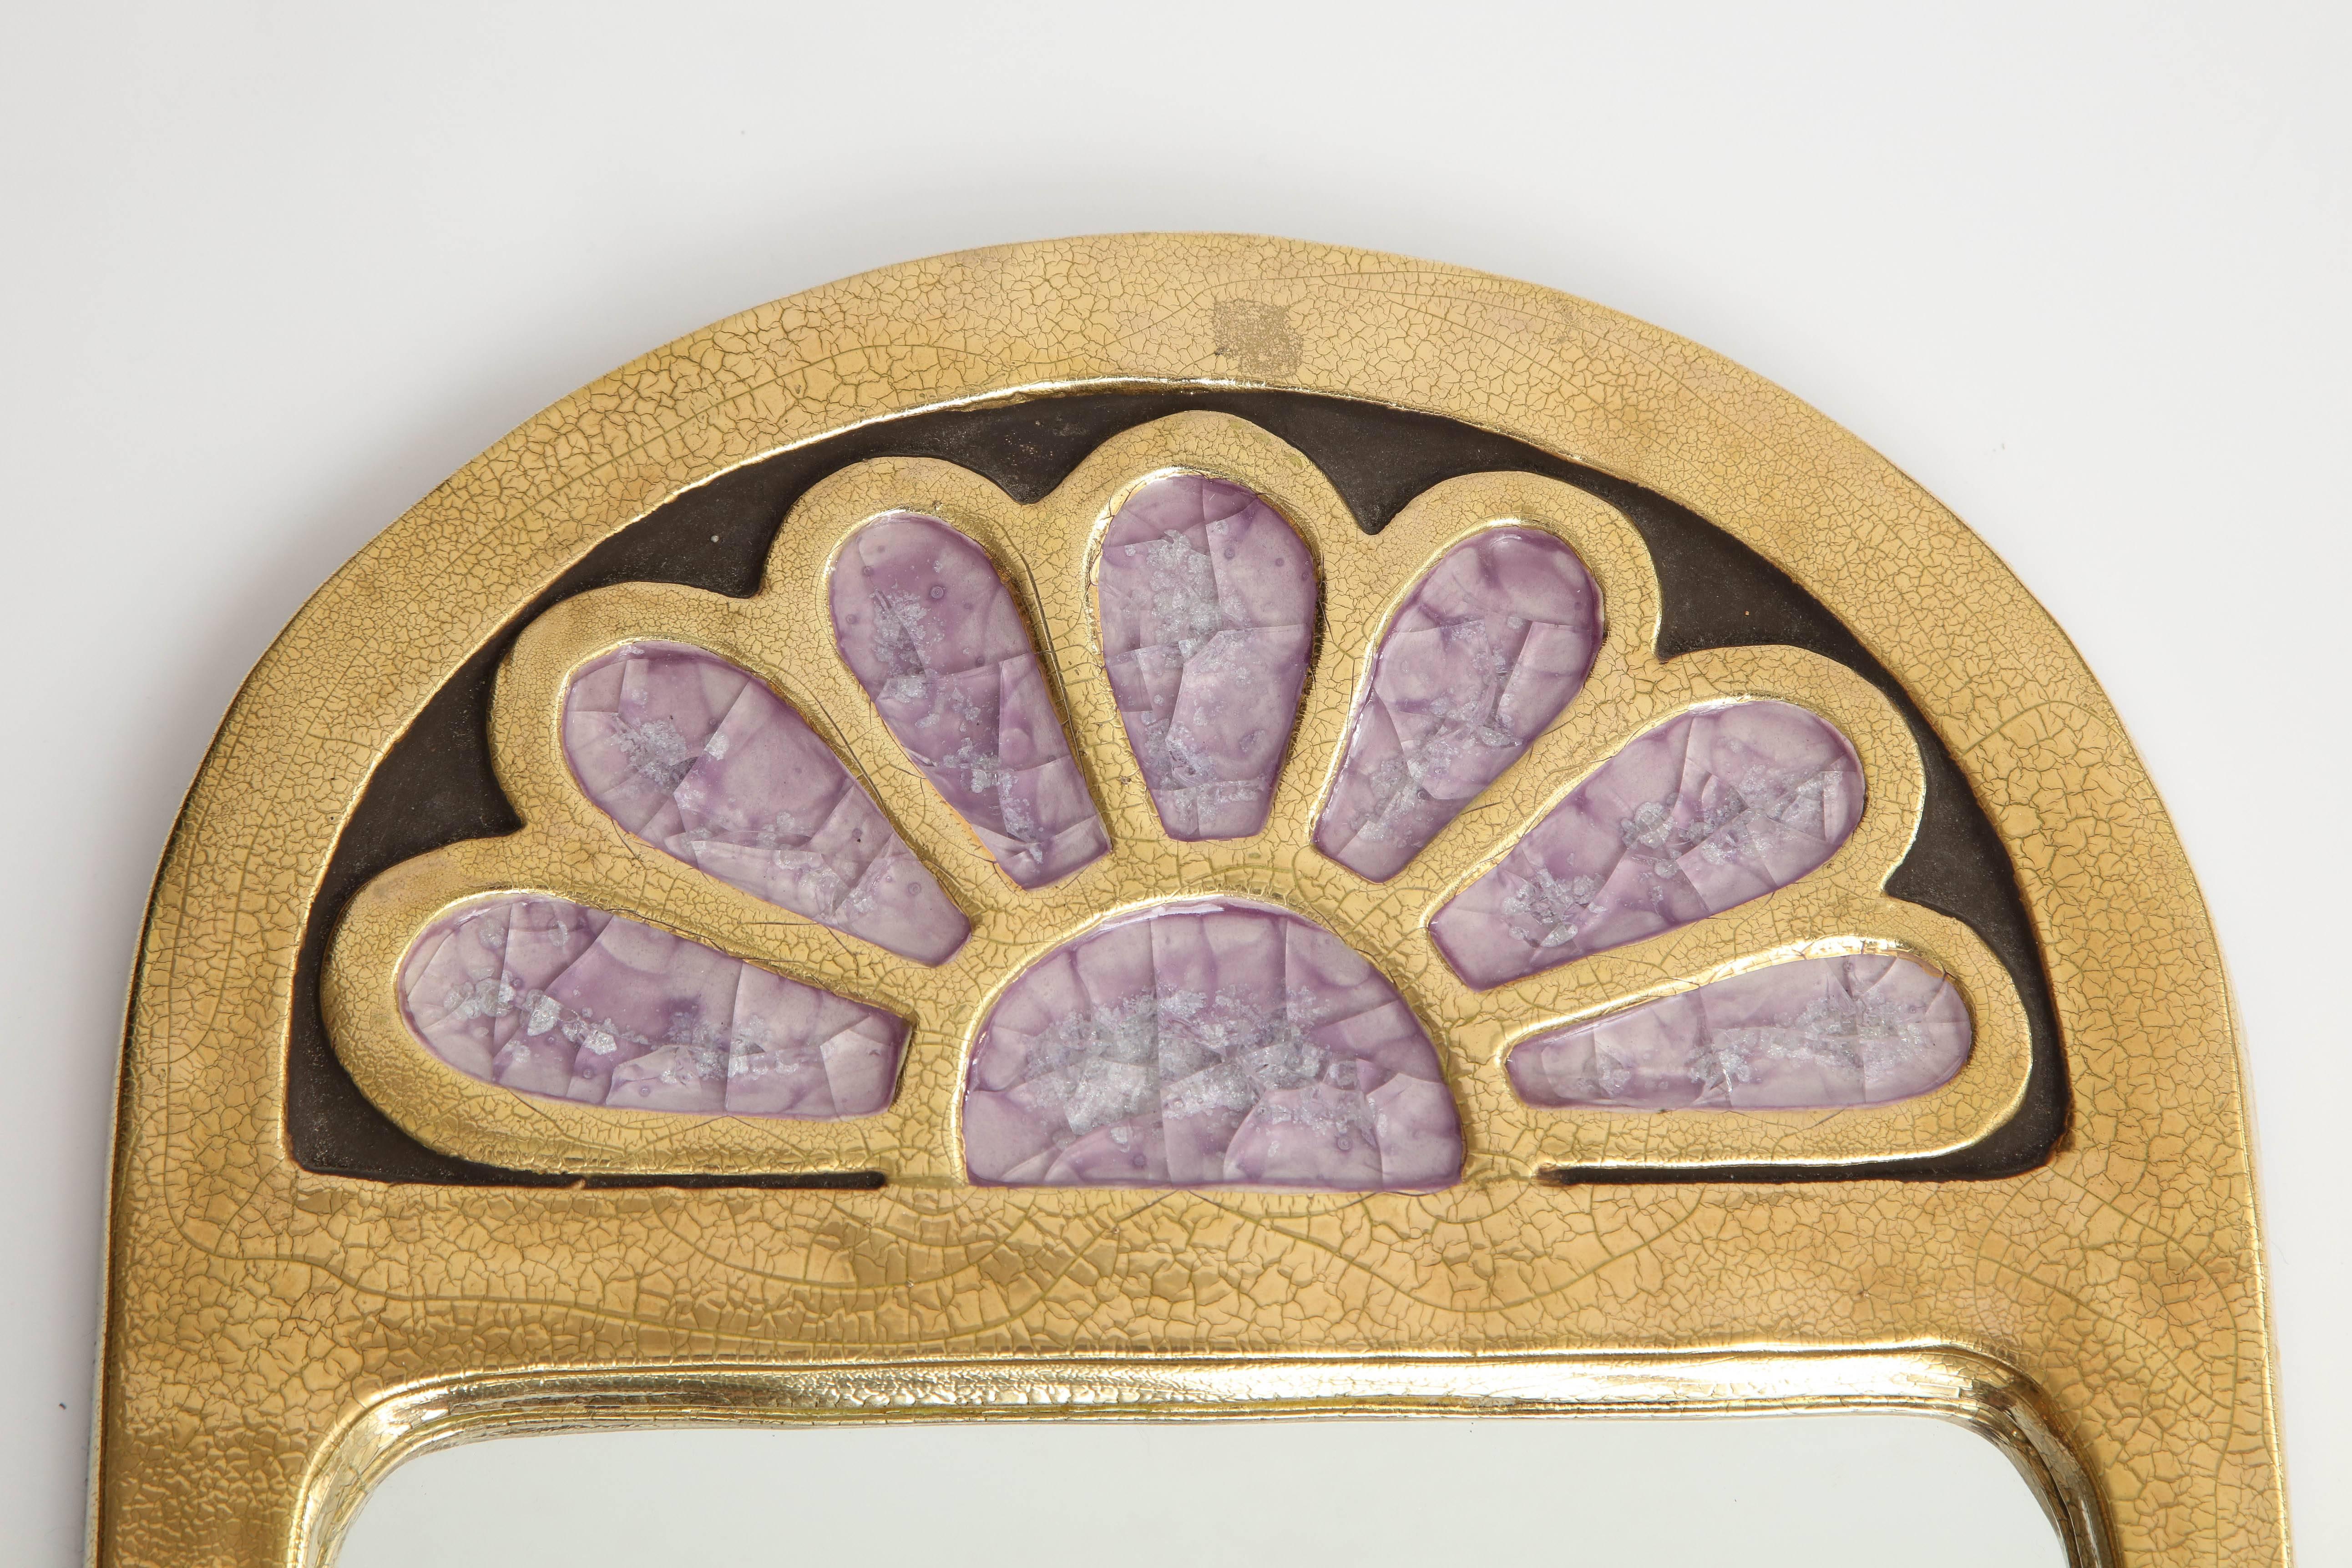 Inspired by Russian icons, Francois Lembo's creations are unique and beautiful works of art. This charming mirror features a frame in a gold crackled glaze surmounted by a flower motif in a lavender stone. Simple and stunning, this piece can go on